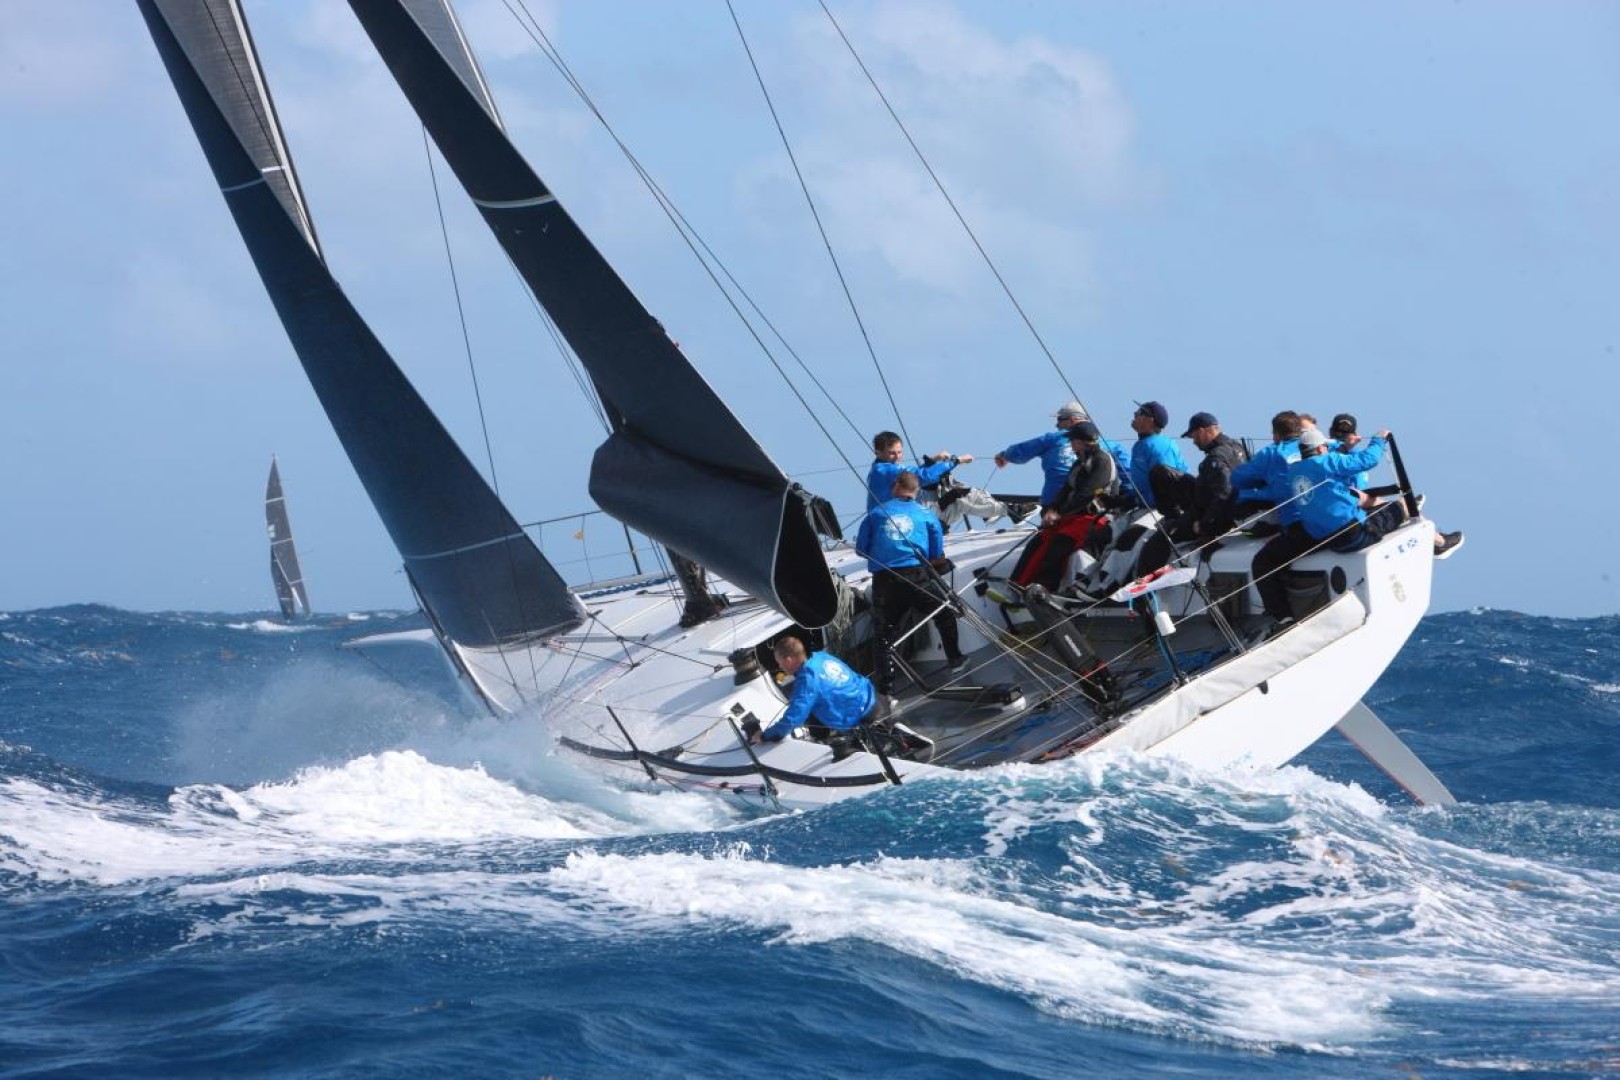 RORC Commodore James Neville's HH42 Ino XXX (GBR) won the Antigua 360 Race after IRC time correction © Tim Wright/Photoaction.com